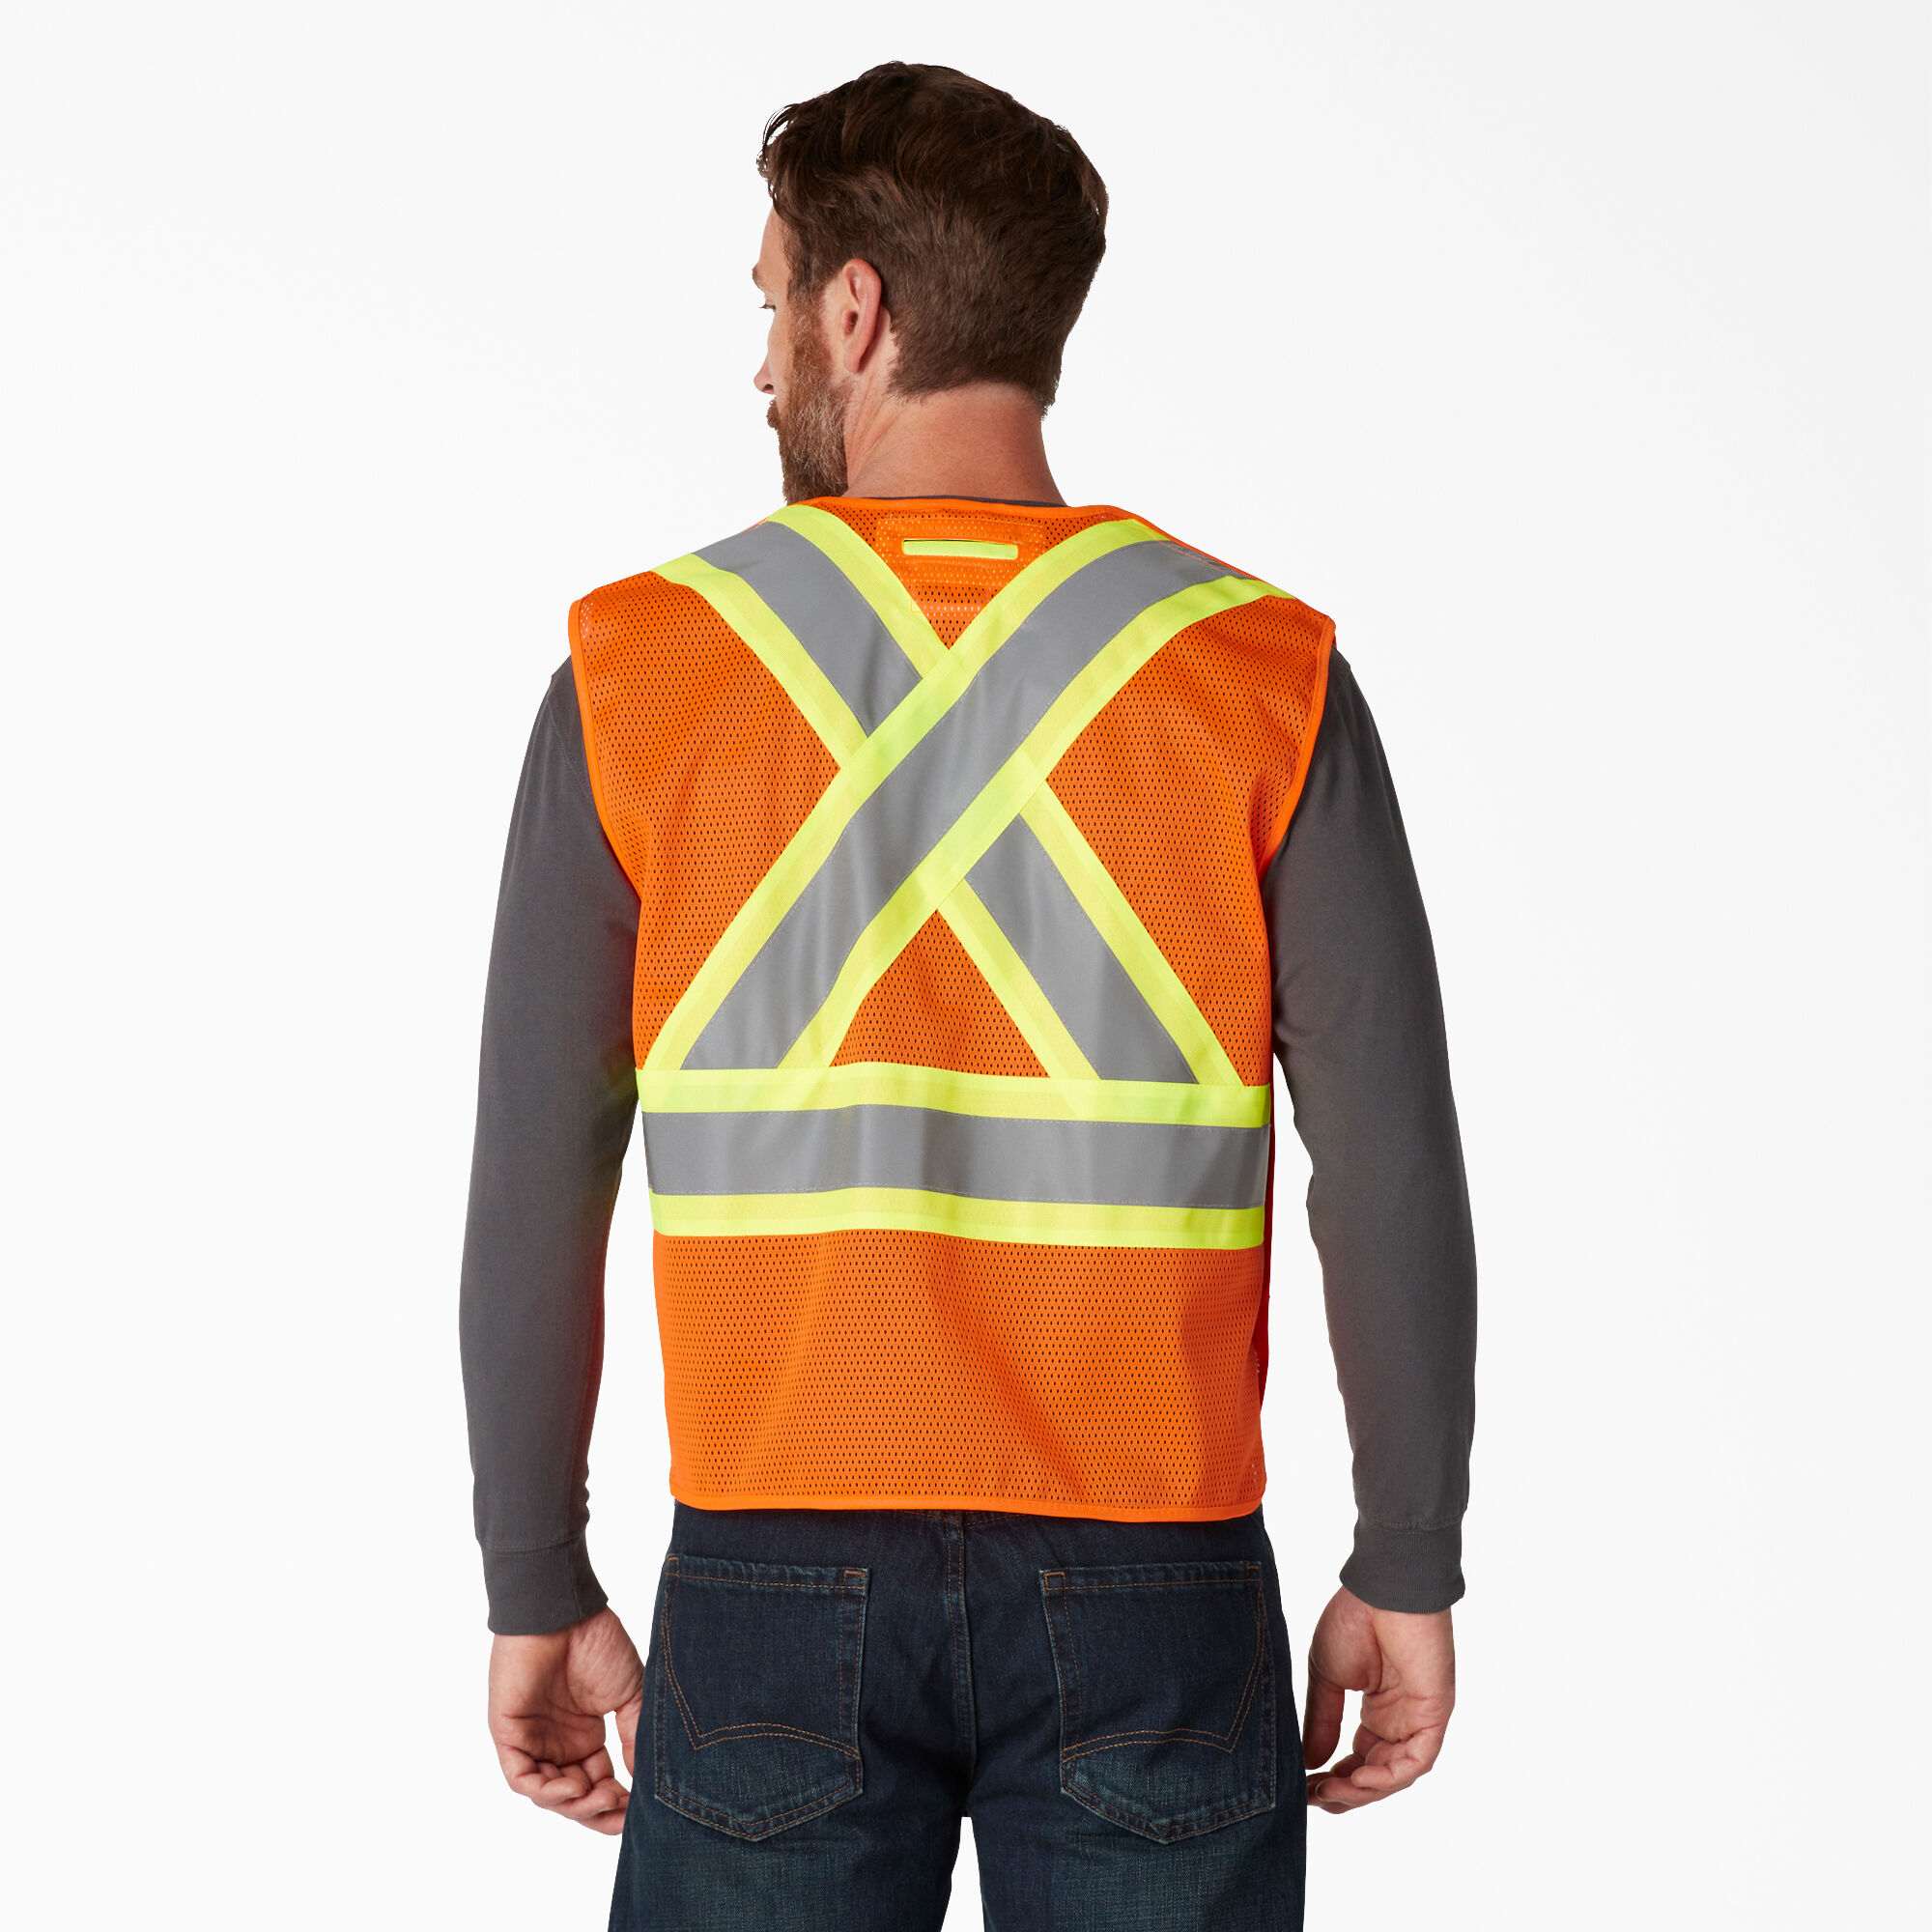 Orange Reflective Dickie's High Visibility Coveralls NEW 